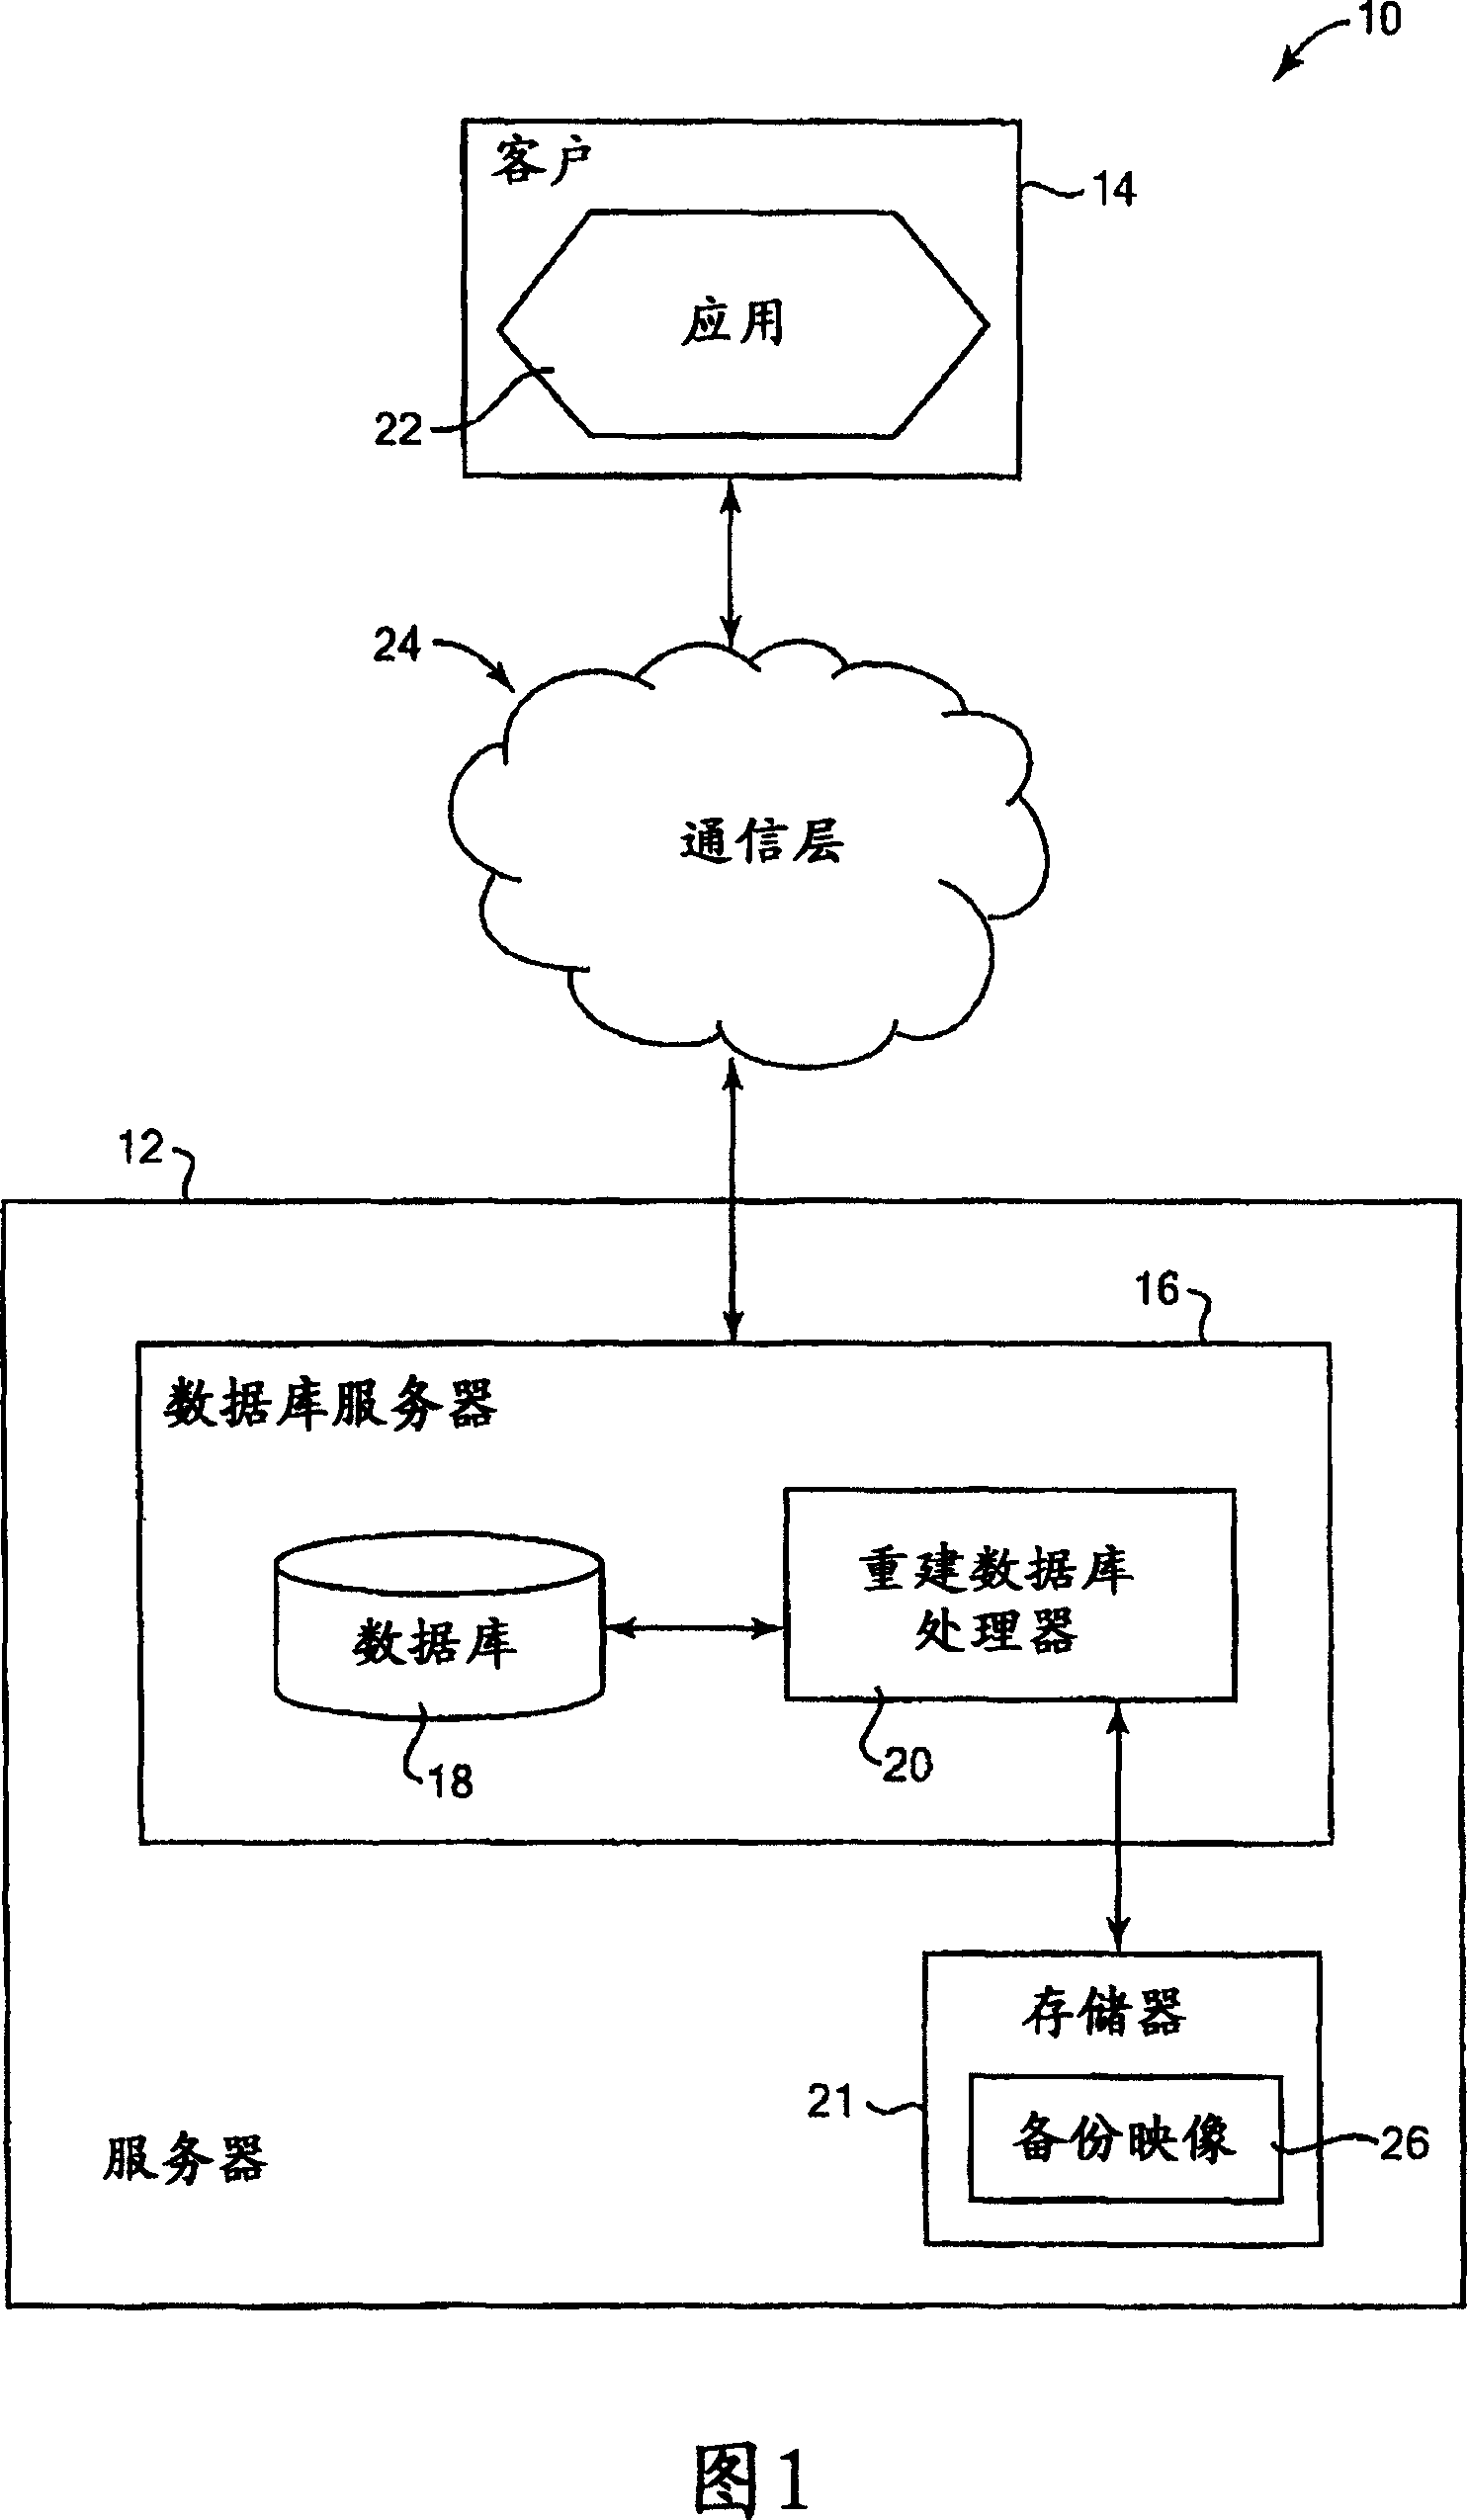 Method and system for building a database from backup data images